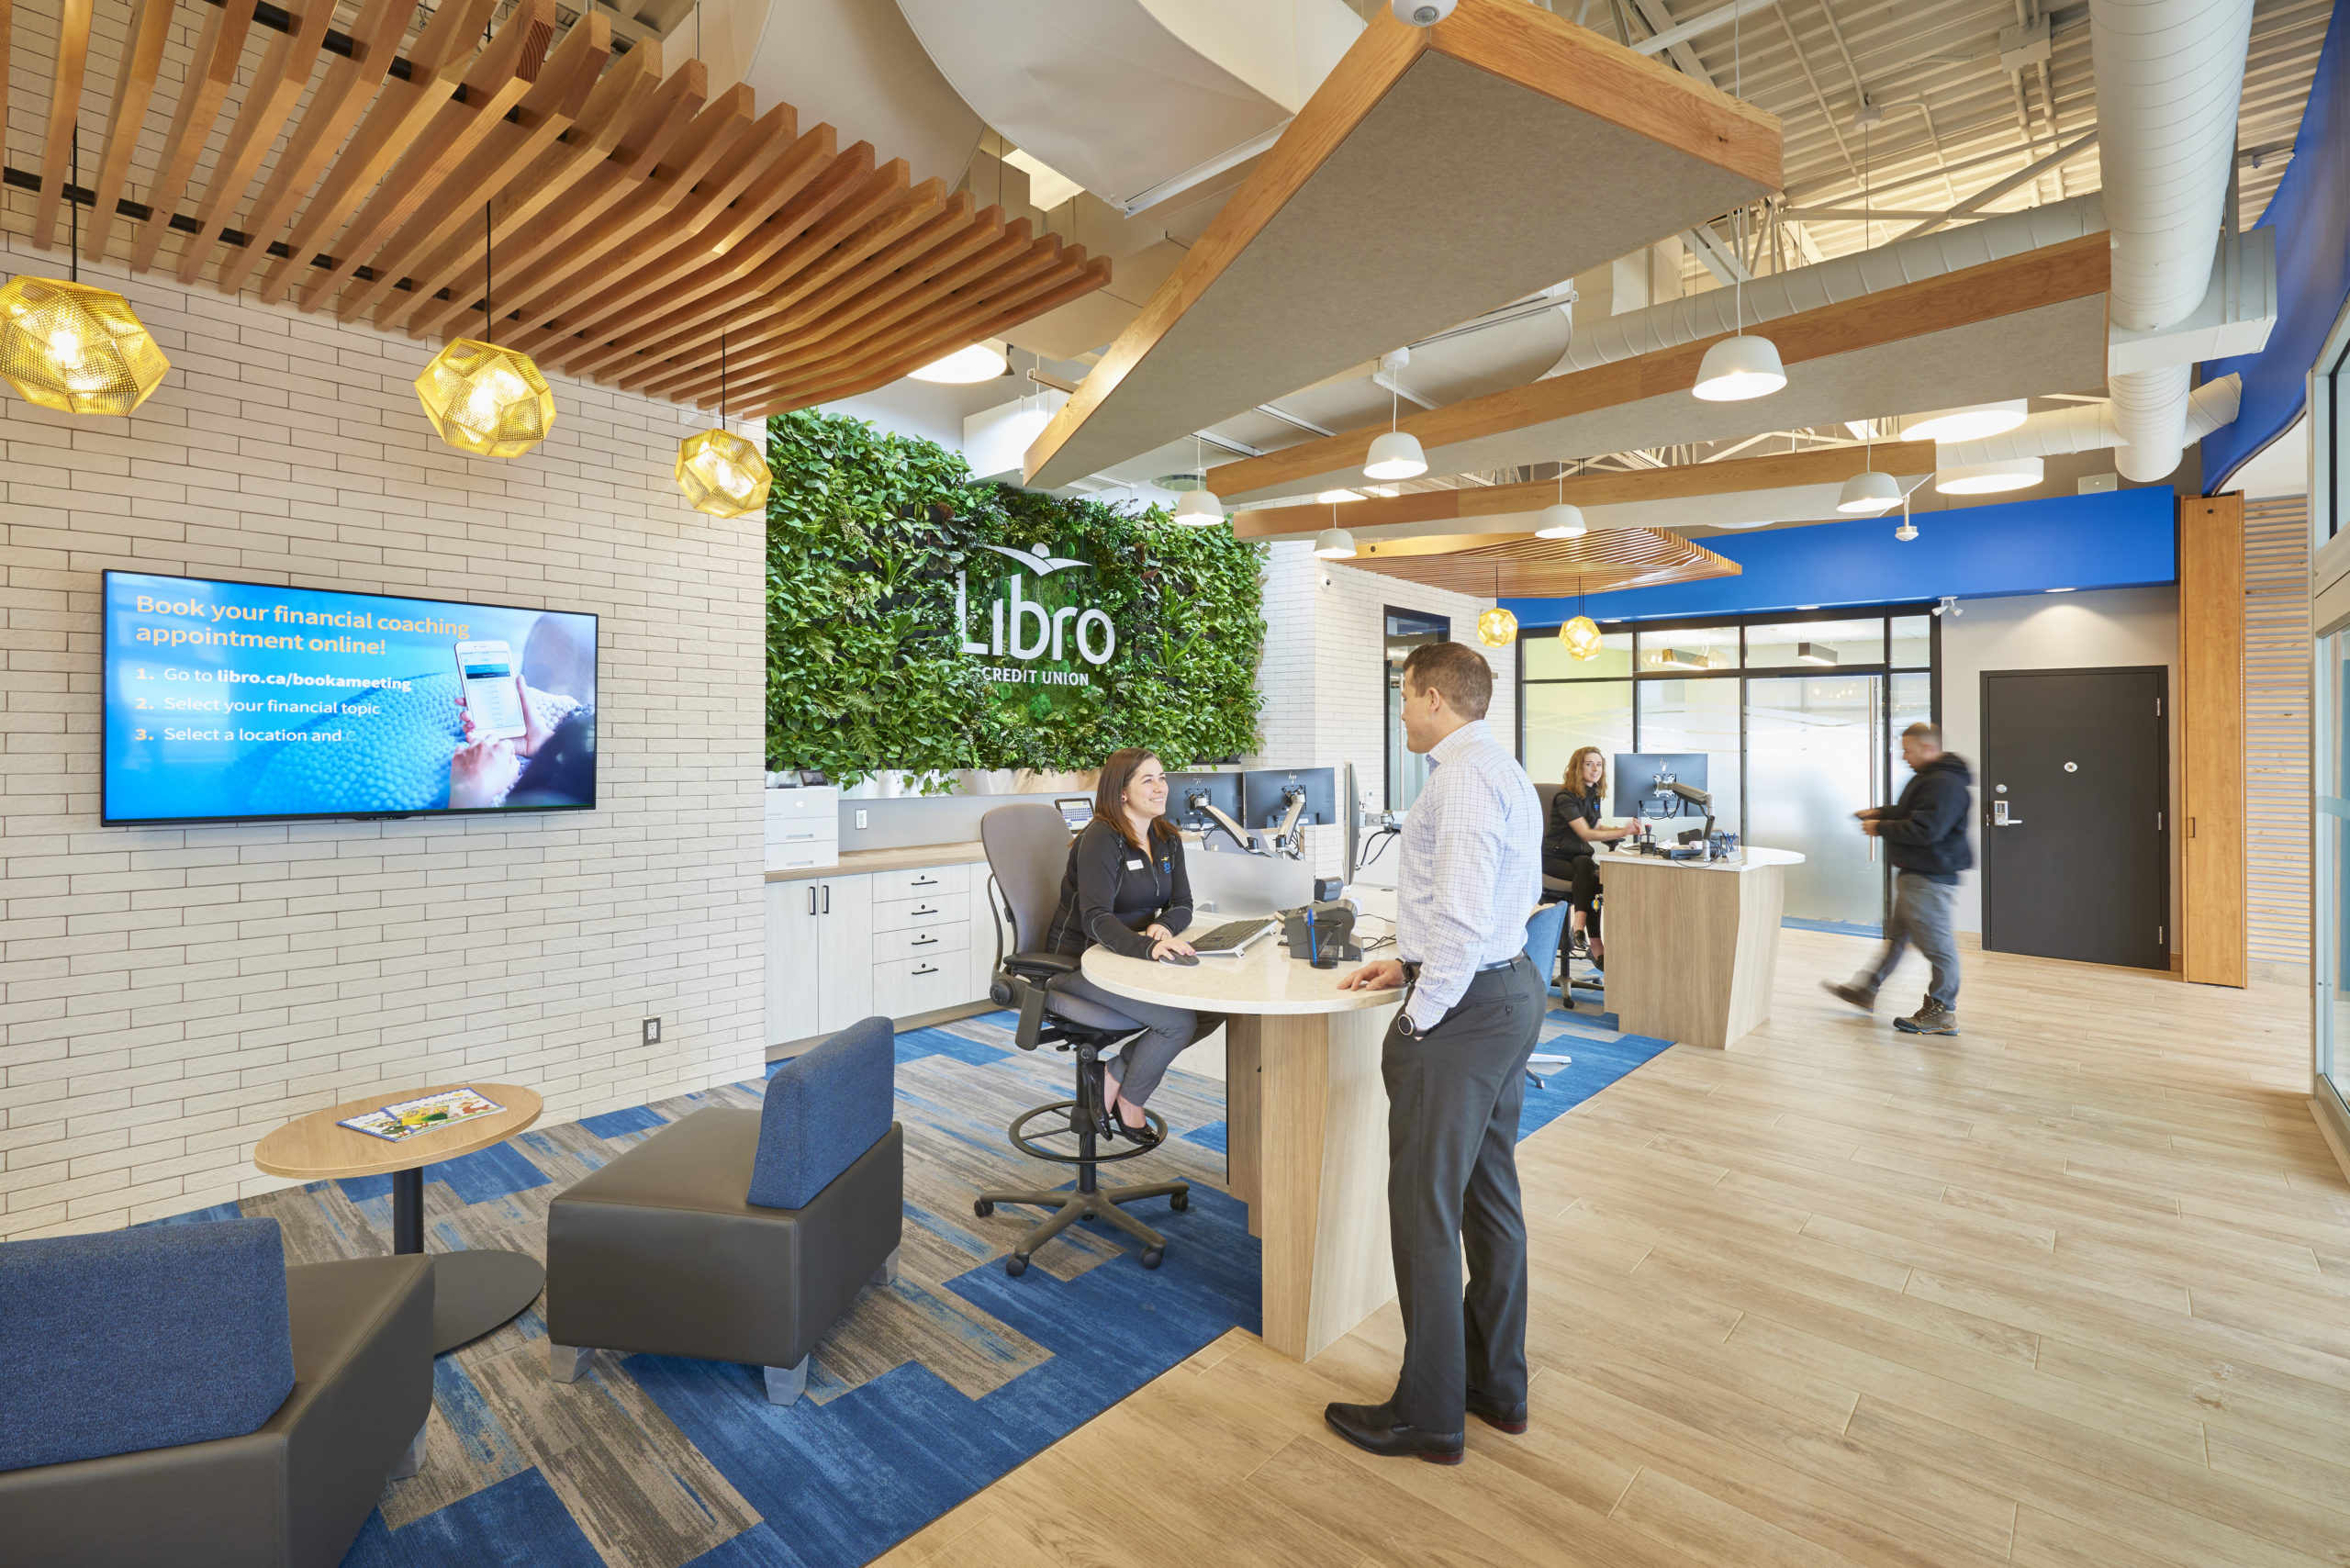 interior of Libro Credit Union lobby technology screen on the wall over a seating area, man standing at a counter speaking to a woman